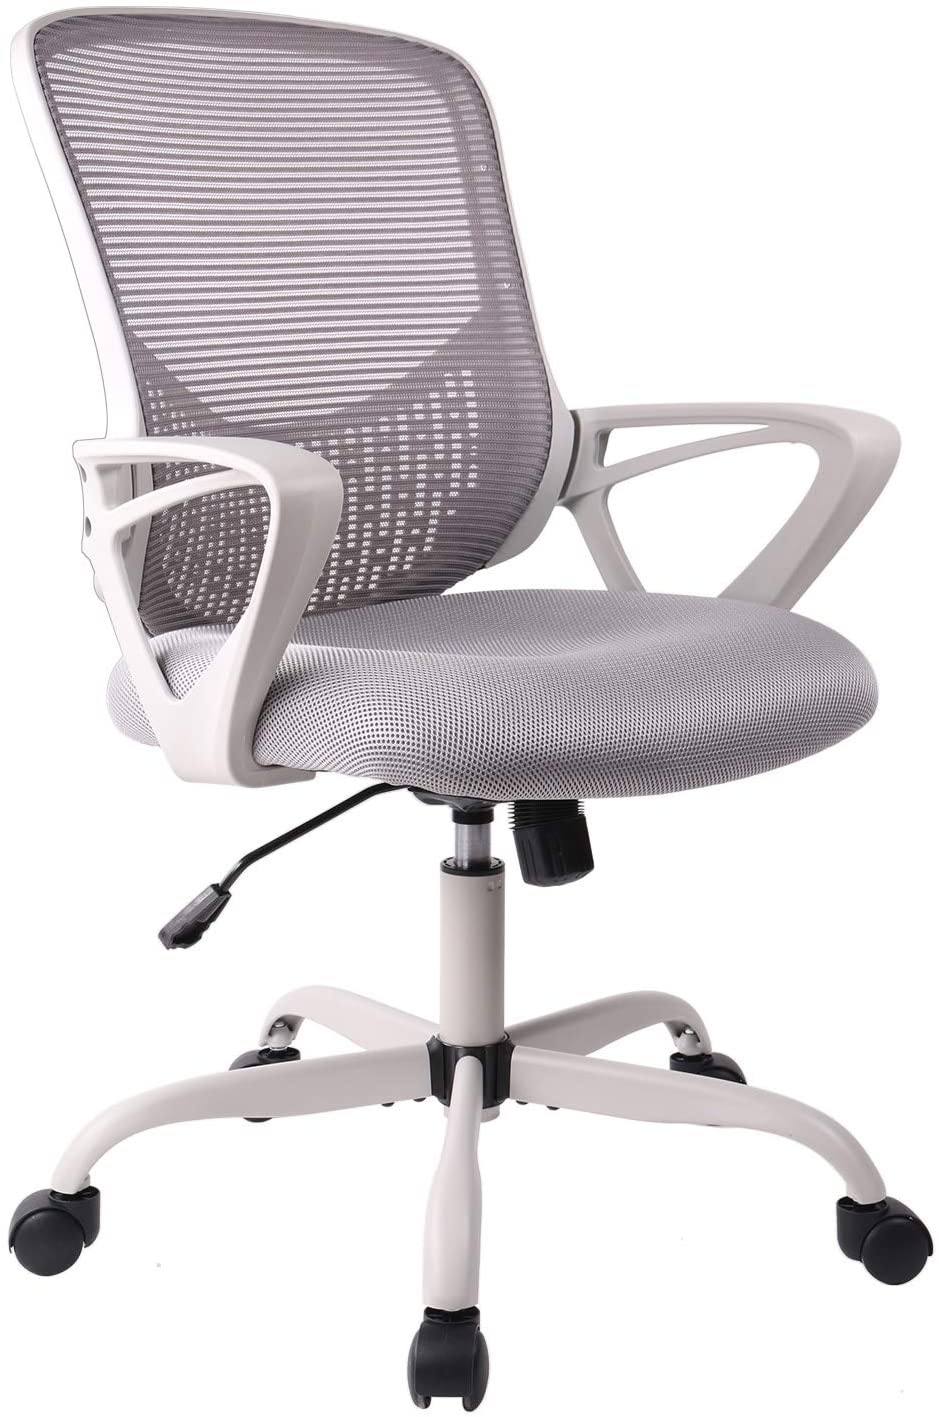 Office Chair, Ergonomic Desk Chair Computer Task Chair Mesh with Armrests Mid-Back for Home Office Conference Study Room, Gray